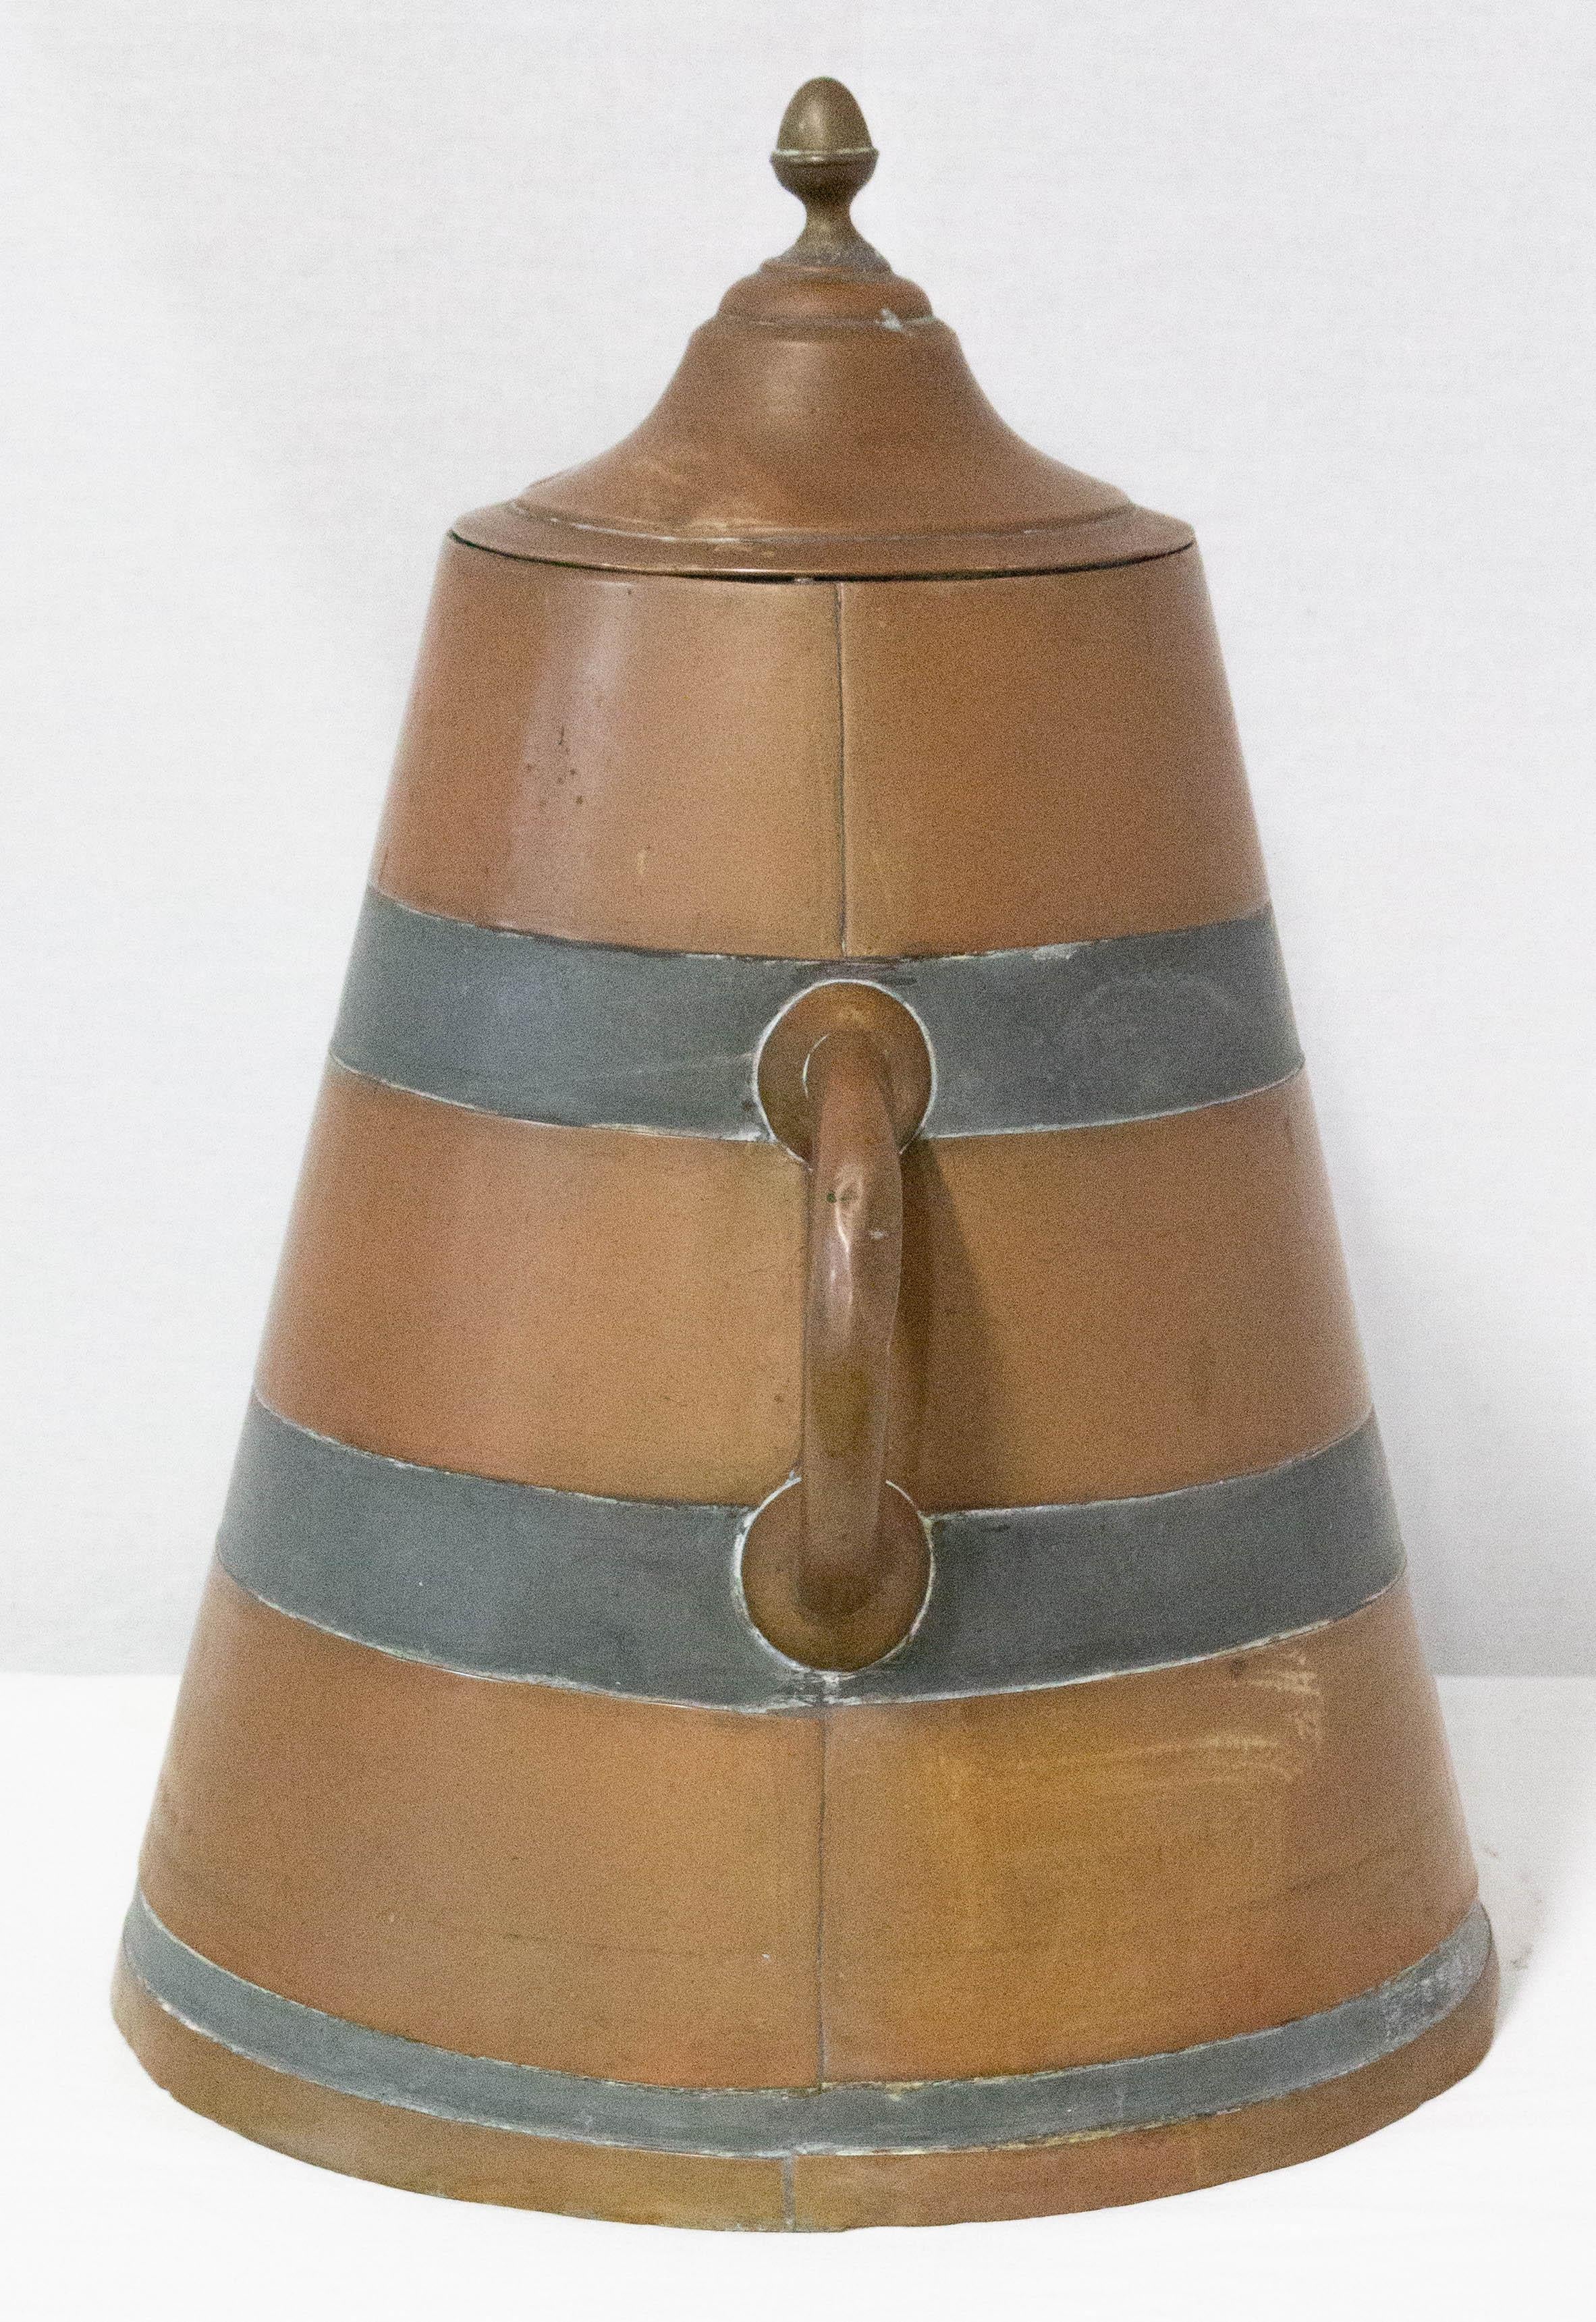 Neoclassical Decorative French Basque Water Holder Zinc and Copper Herrade, 19th Century For Sale